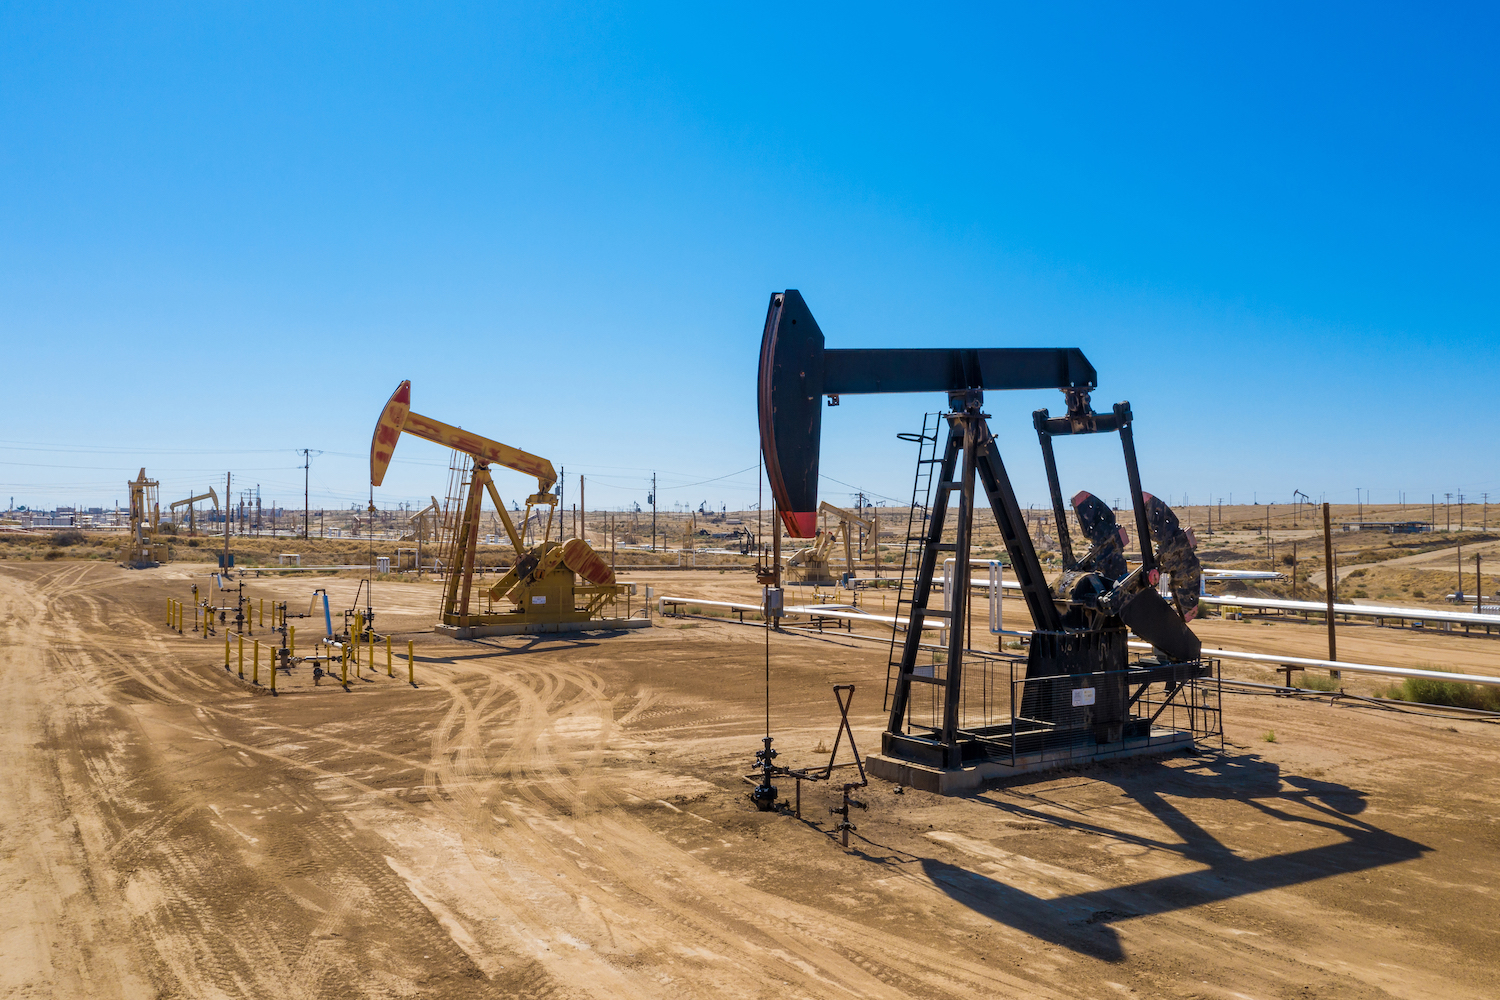 oil derrick pumps in a sandy field during the day with blue sky